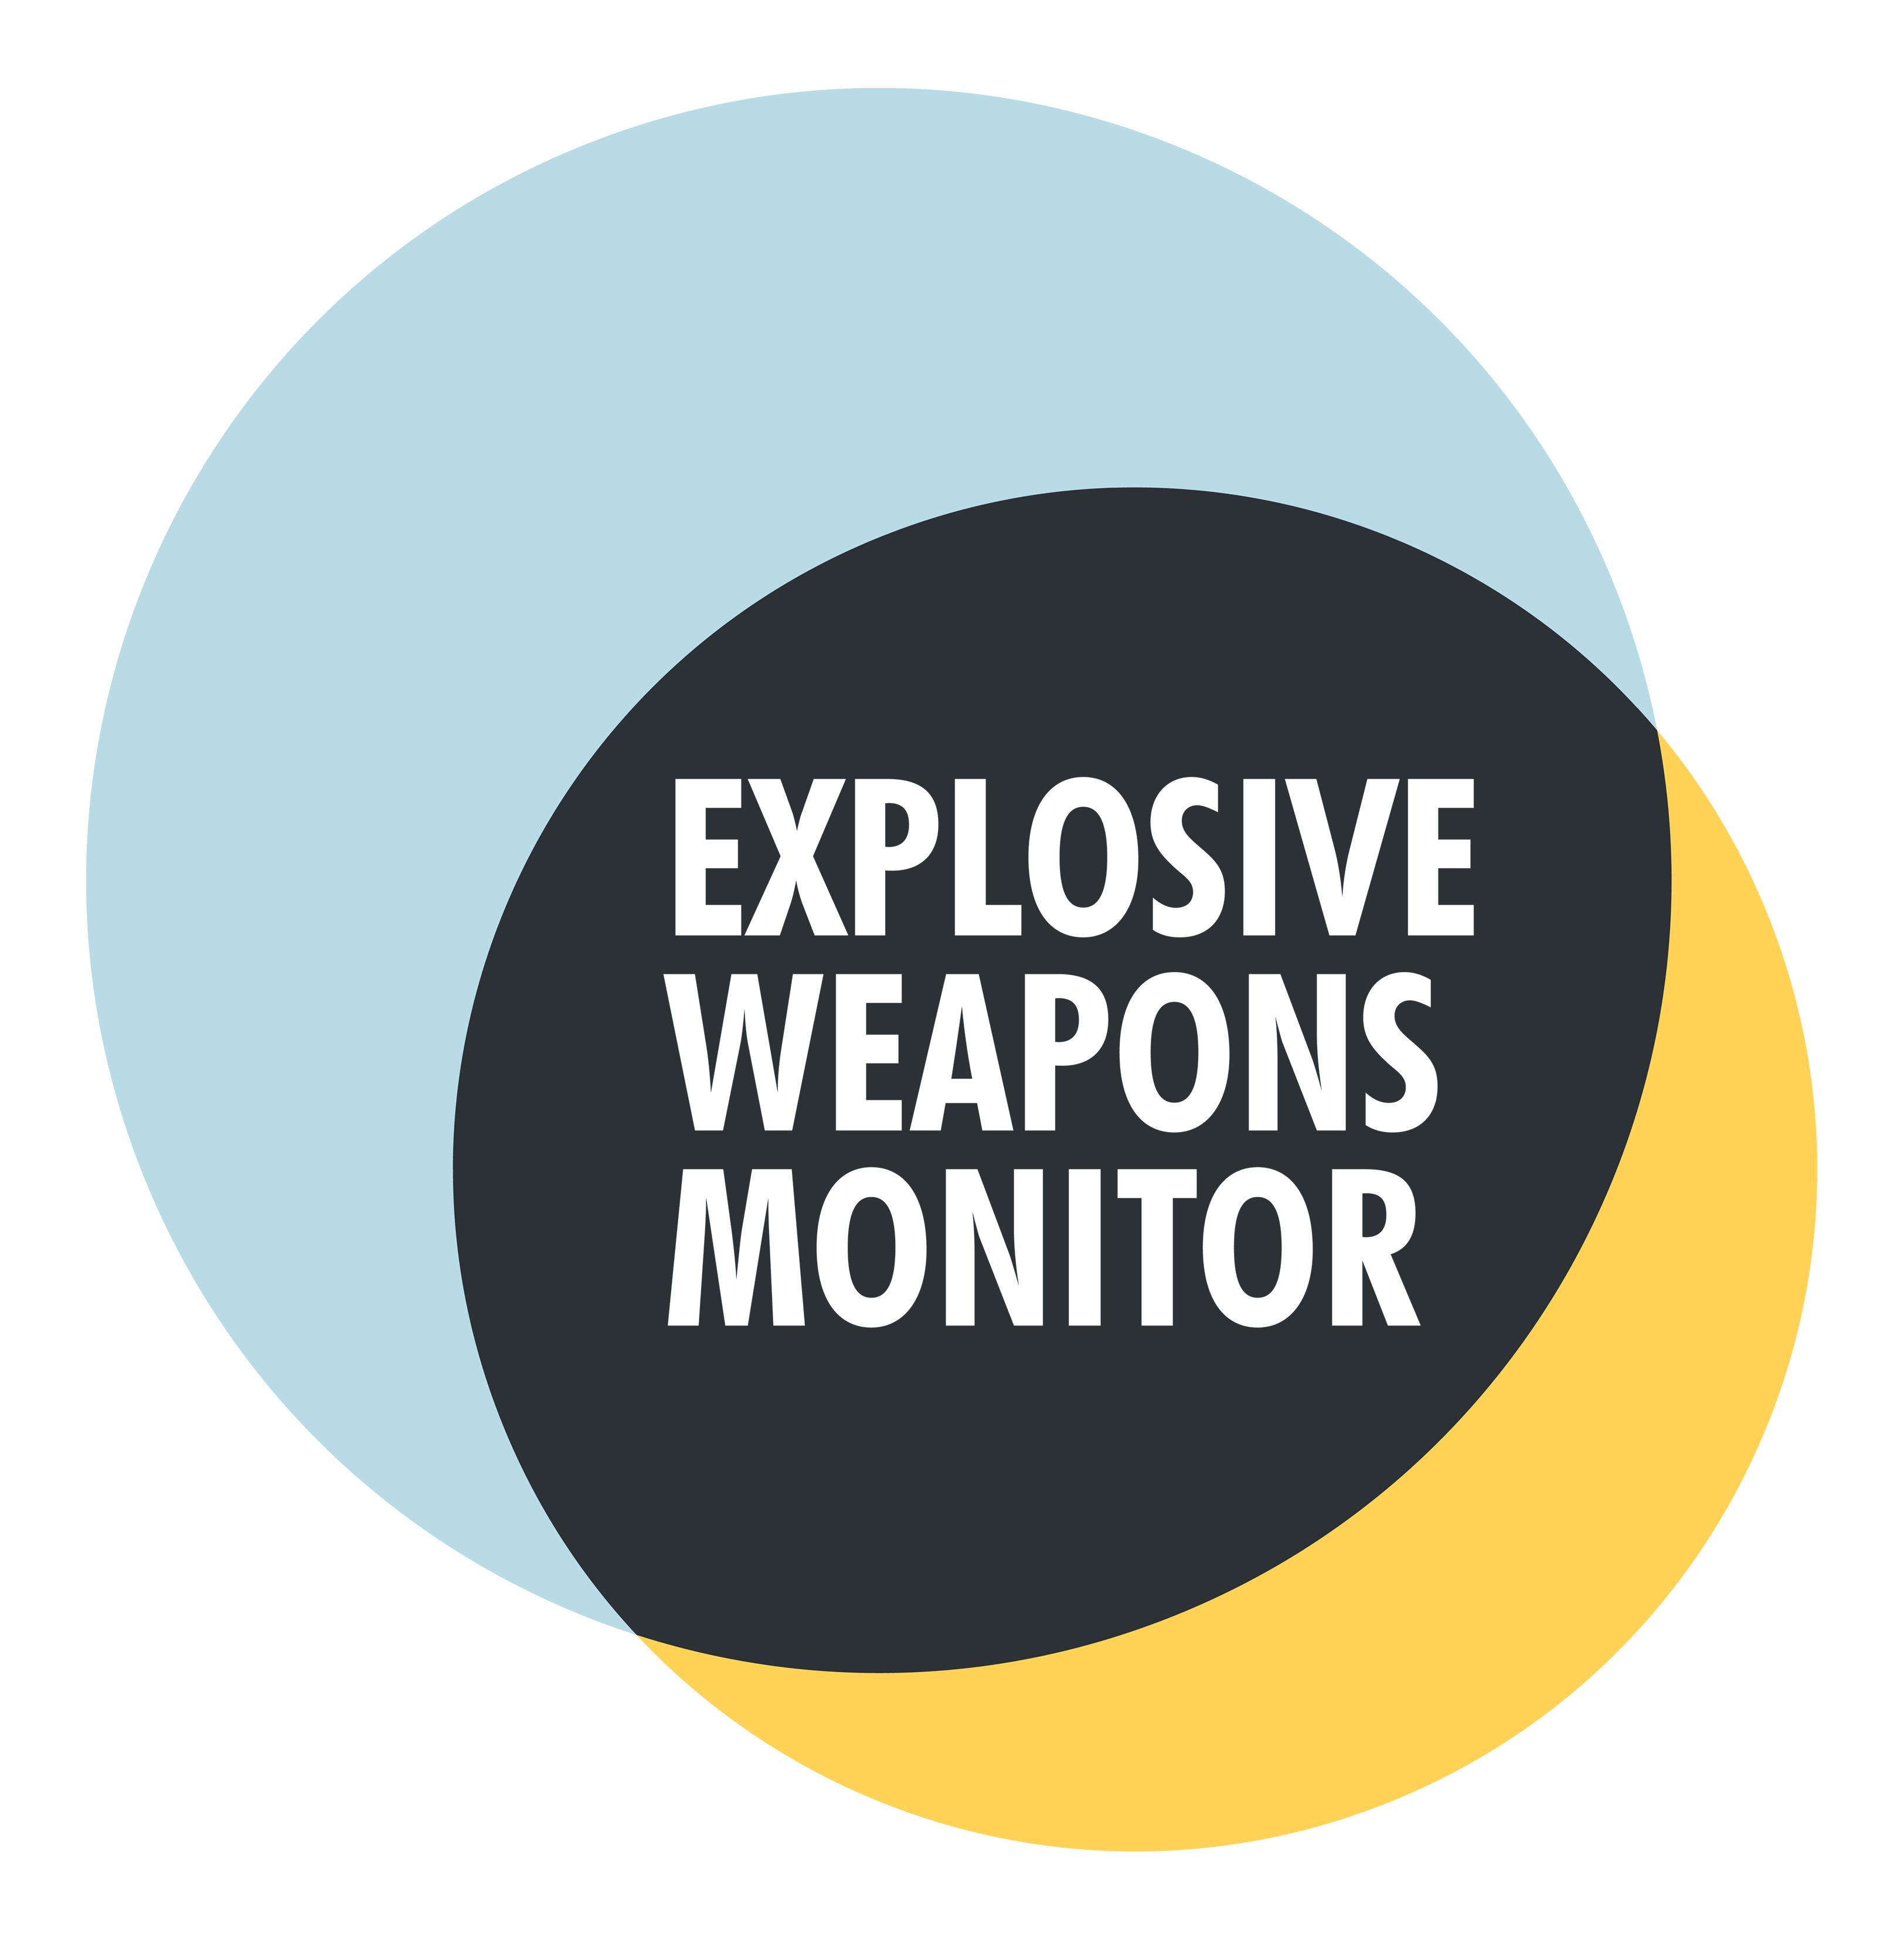 The Explosive Weapons Monitor